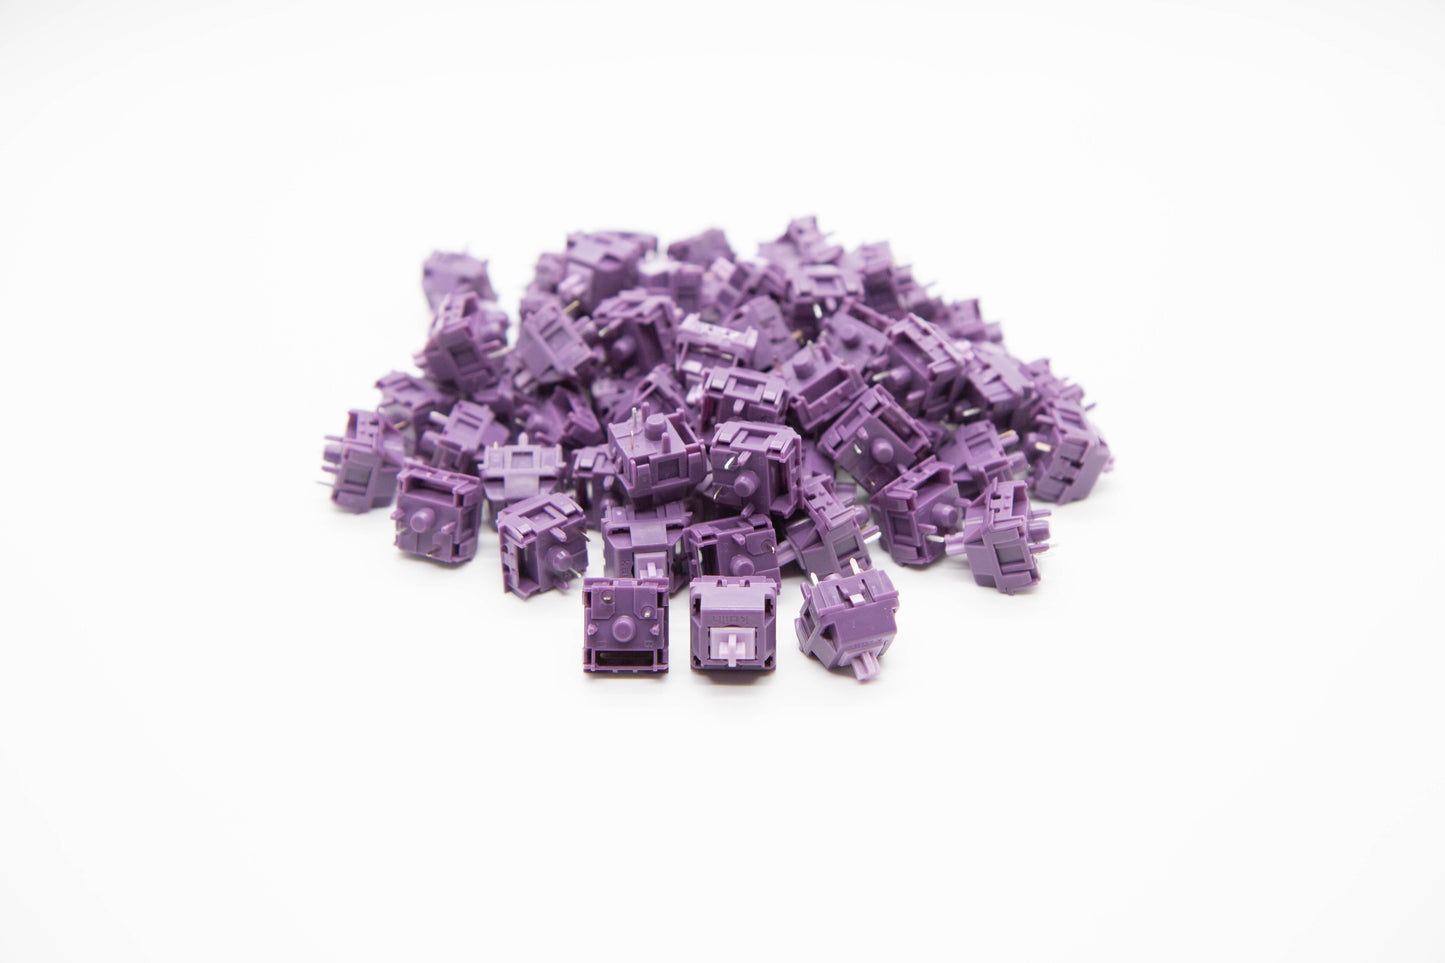 Close-up shot of a pile of Purple Potato mechanical keyboard switches featuring purple housing and light purple stems